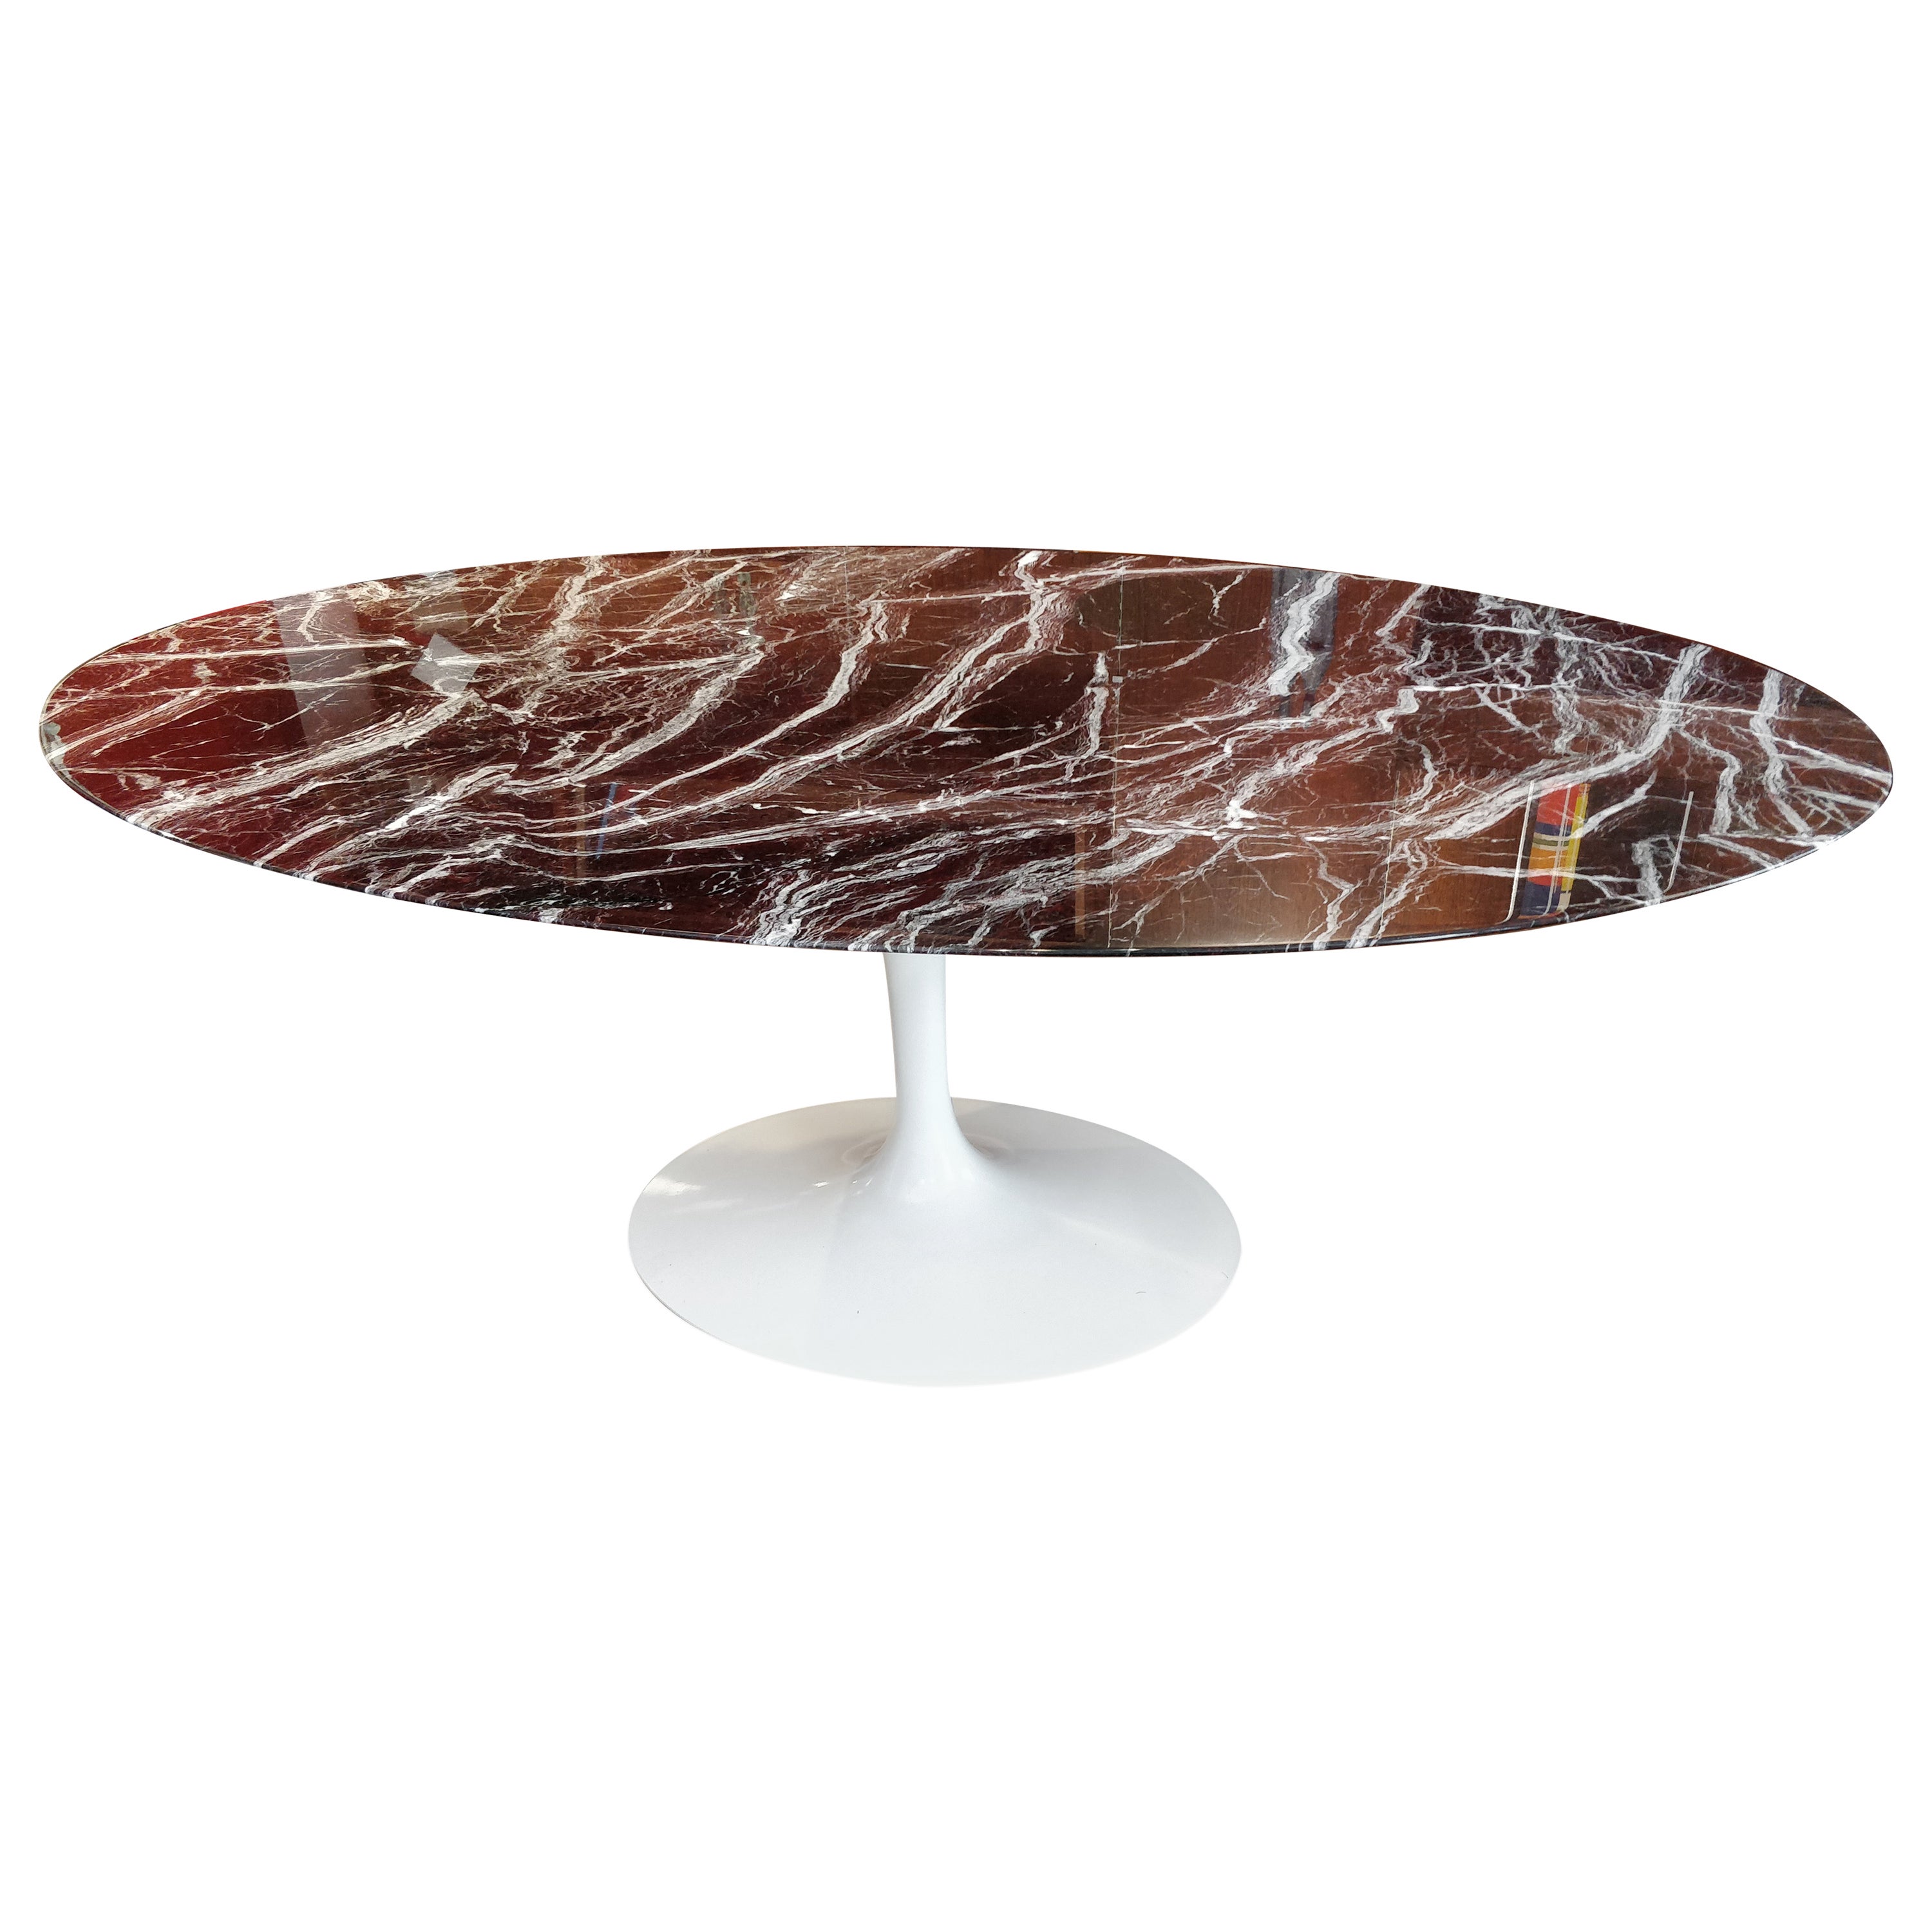 Burgundy Red Marble Oval Dining Table by Eero Saarinen for Knoll Studio